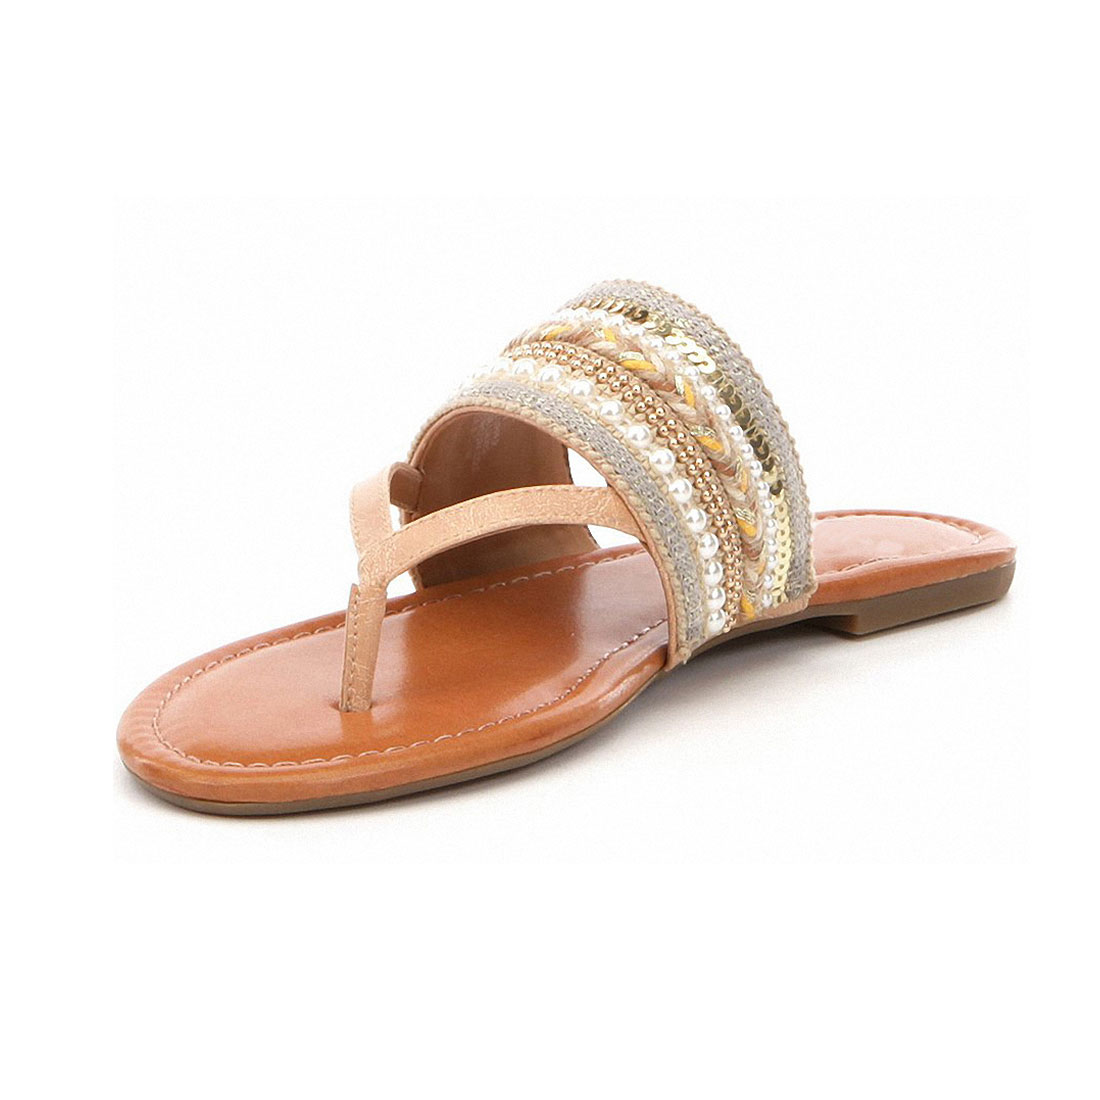 Hot sell comfortable woven upper leather flat slipper lady sandals ...